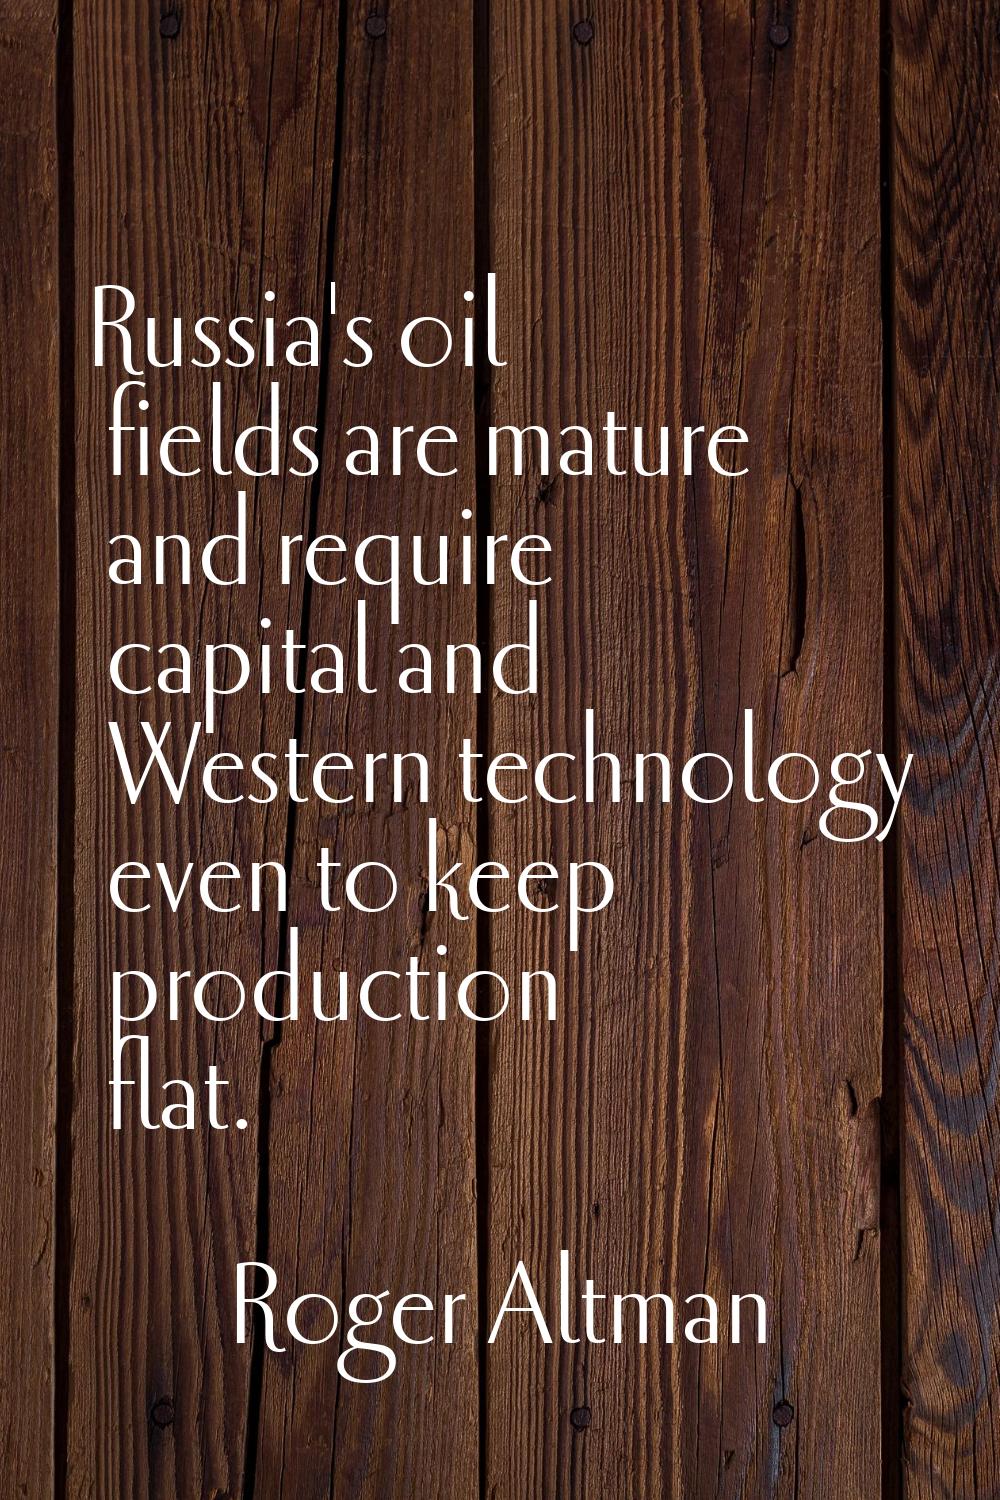 Russia's oil fields are mature and require capital and Western technology even to keep production f